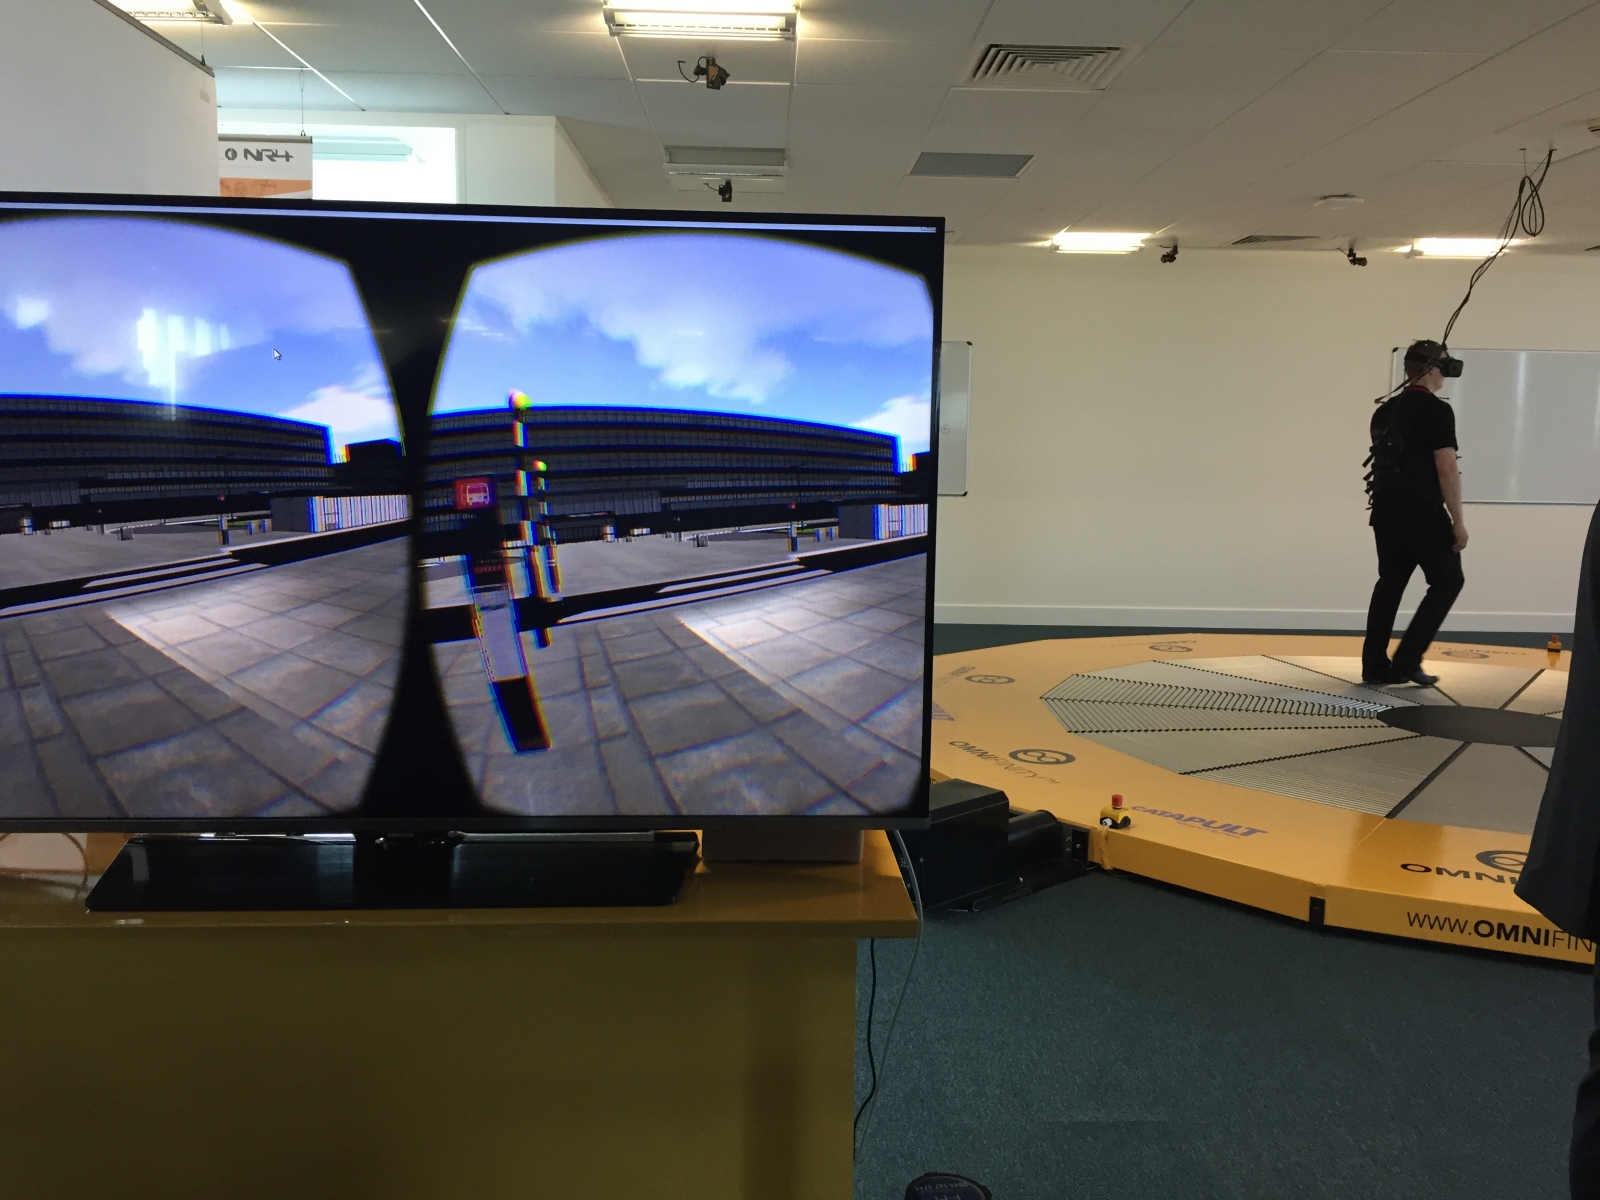 around an autonomous car-filled town with Oculus Rift and treadmill